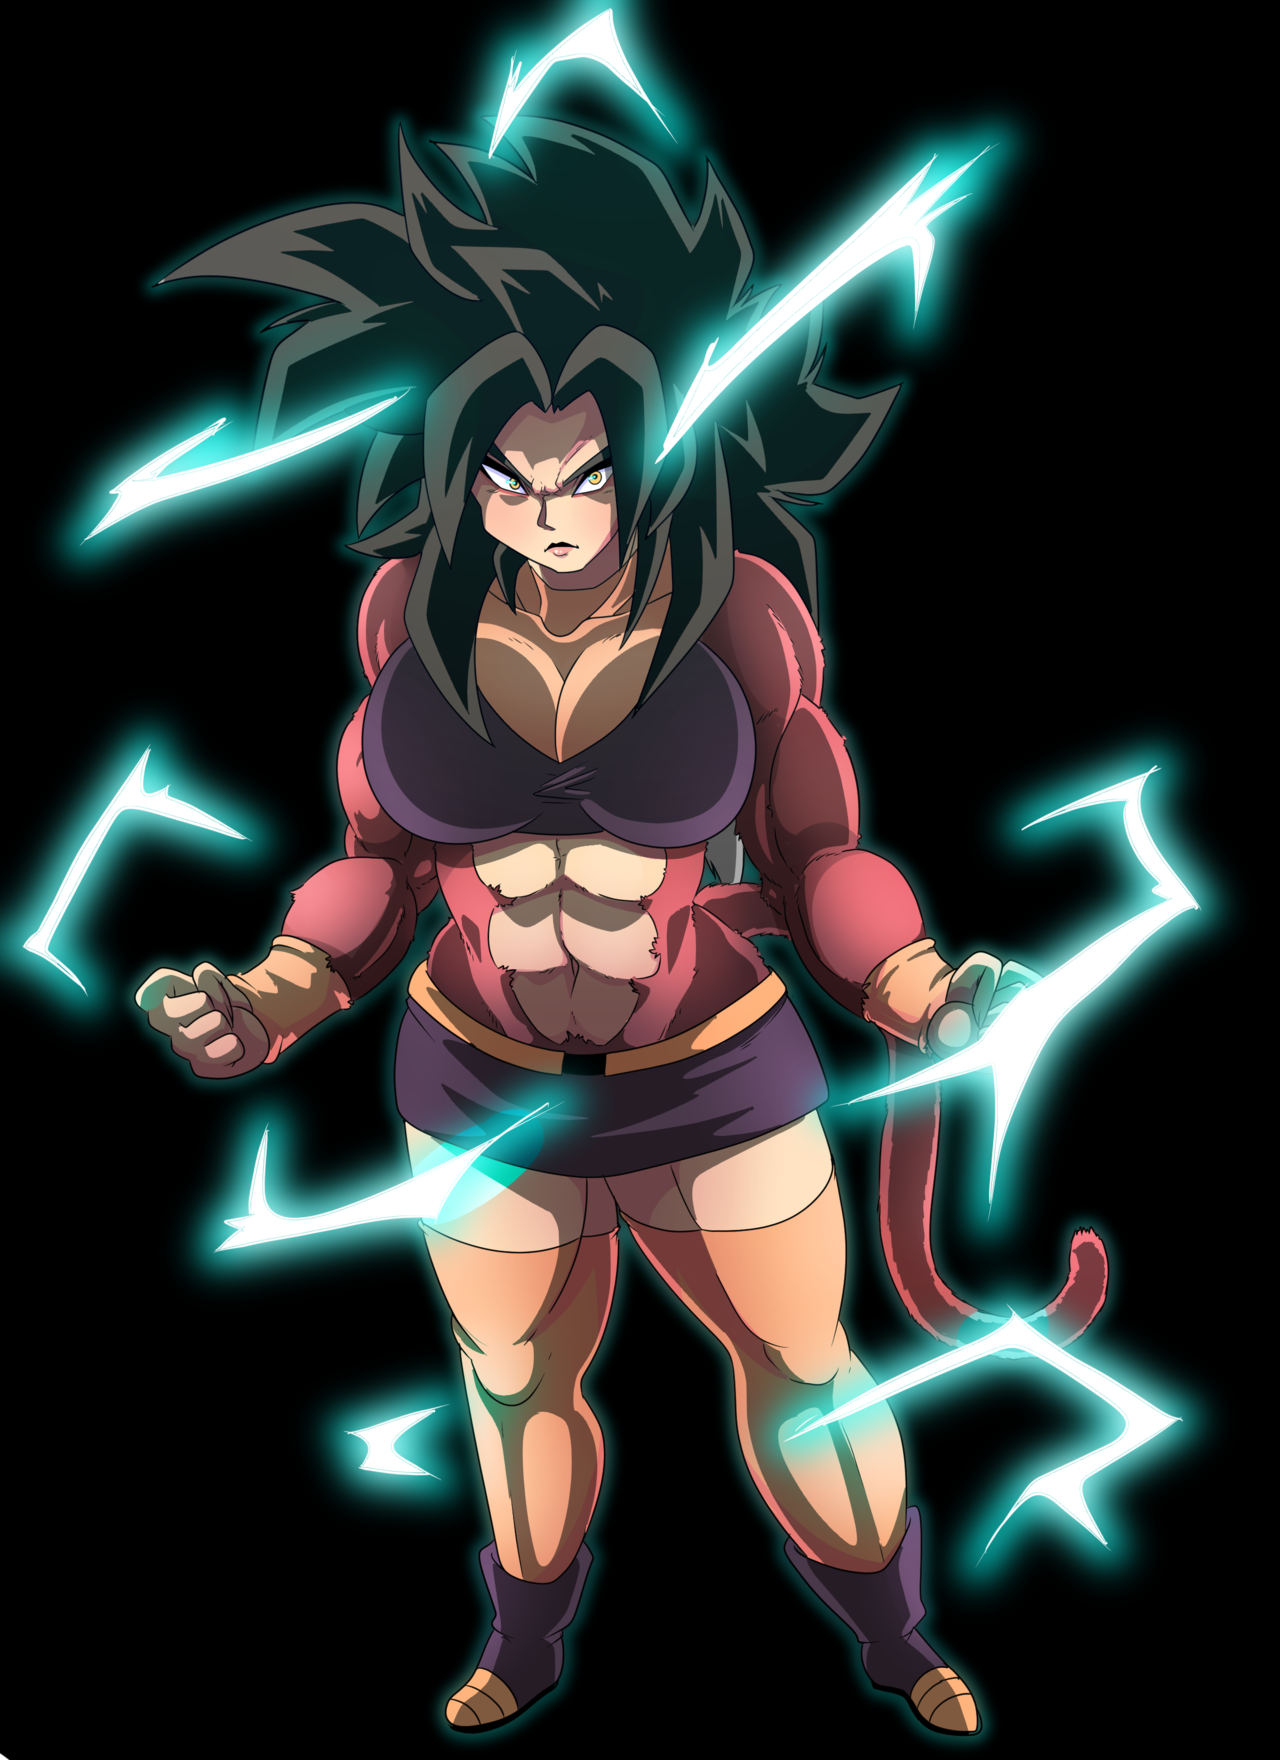 Image Of Angelxart Super Saiyan 4 Oc I Did As A Commission Her Name.